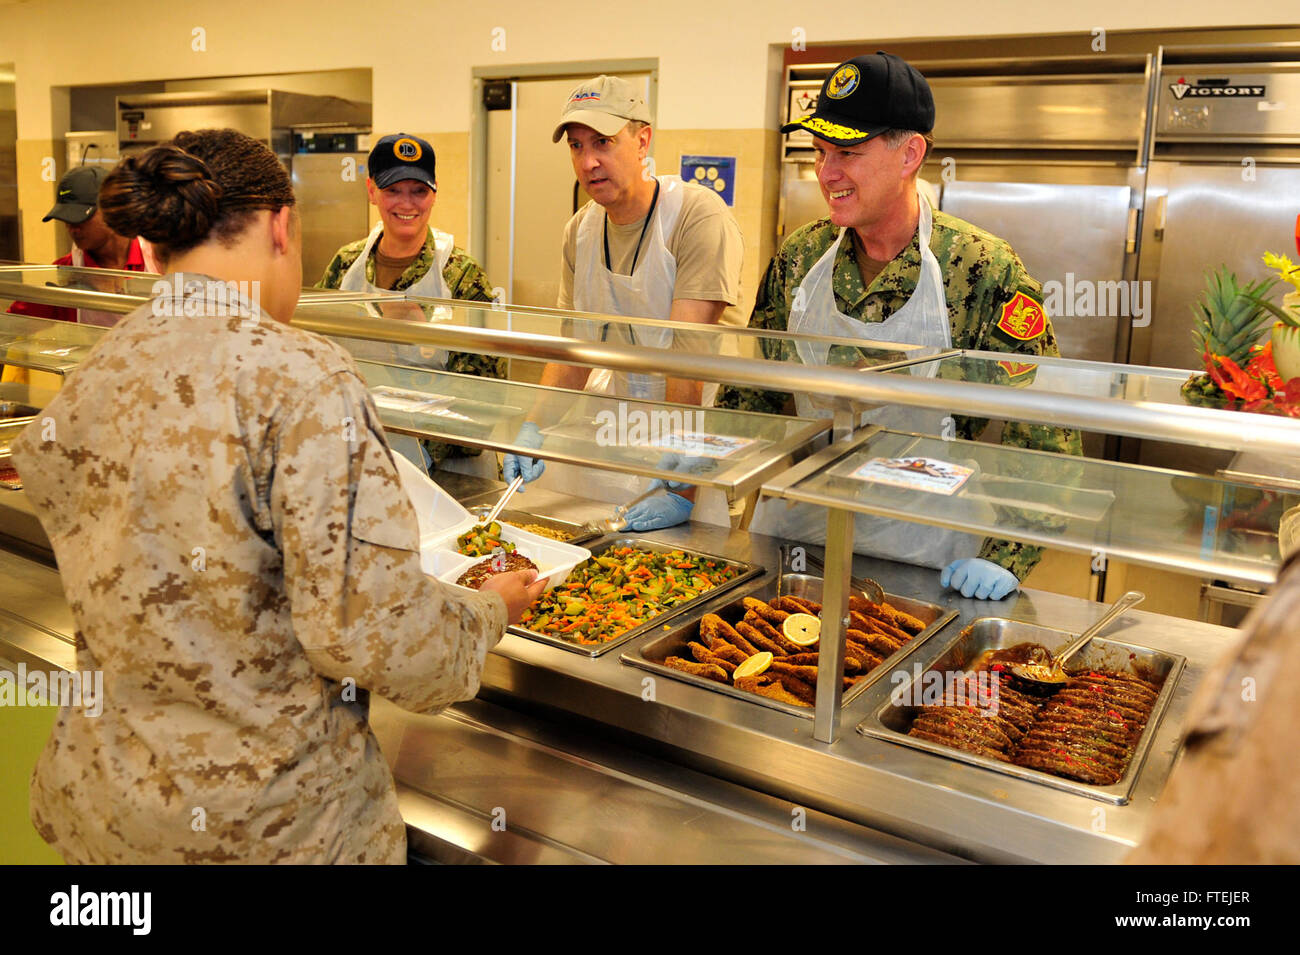 CAMP LEMONNIER, Djibouti (Nov. 27, 2014) Adm. Mark Ferguson, commander, U.S. Naval Forces Europe-Africa (right), U.S. Ambassador to Djibouti, Tom Kelly (center), and Fleet Master Chief JoAnn Ortloff (left), serves Thanksgiving lunch at Camp Lemonnier. Ferguson visited Camp Lemonnier to thank Sailors for supporting forward U.S. forces and for strengthening security in East Africa. Stock Photo